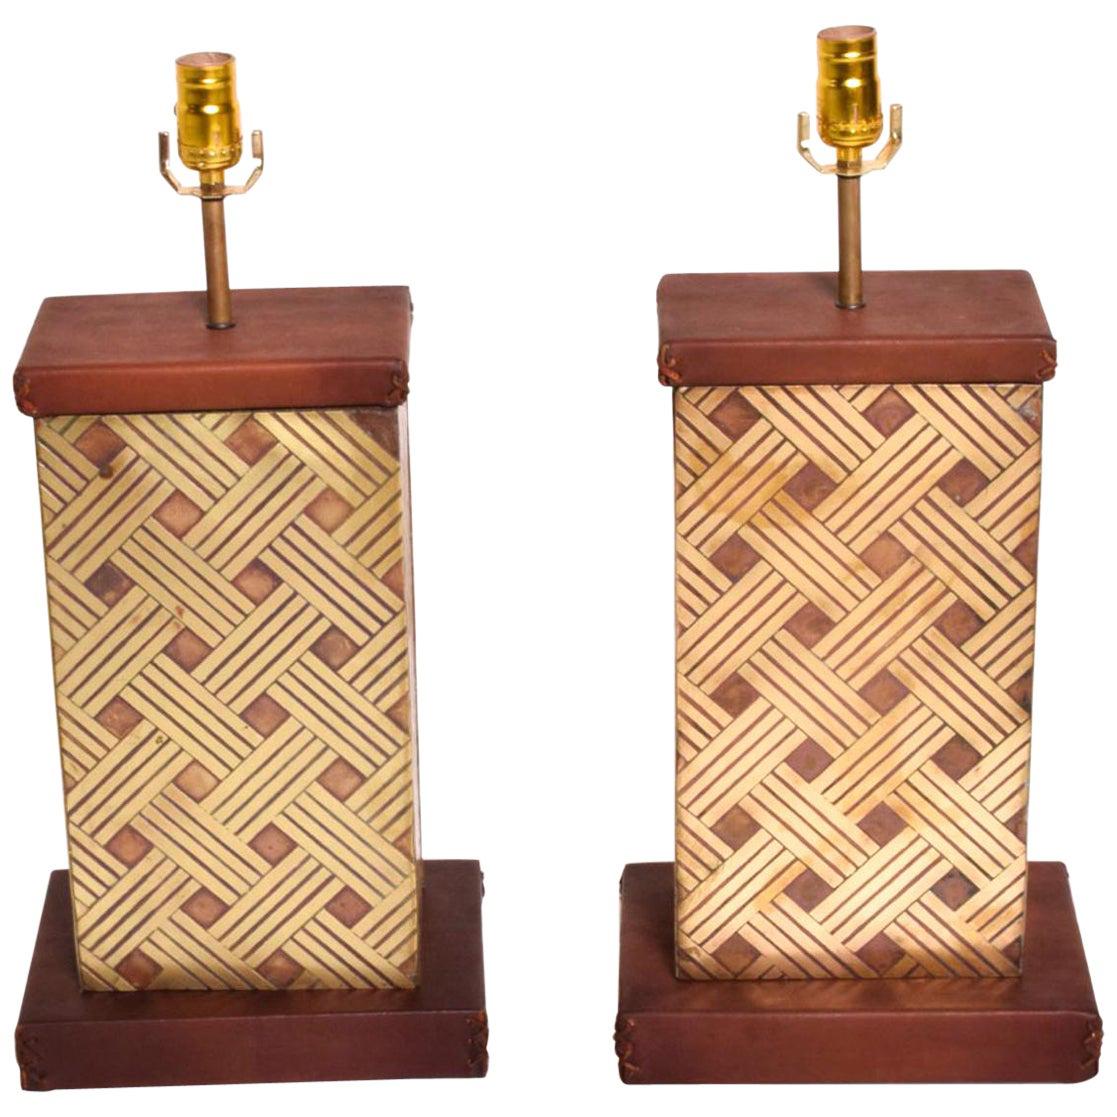  1970s Geometric Bronze Leather & Wood Table Lamps Luis Barragan Modernism